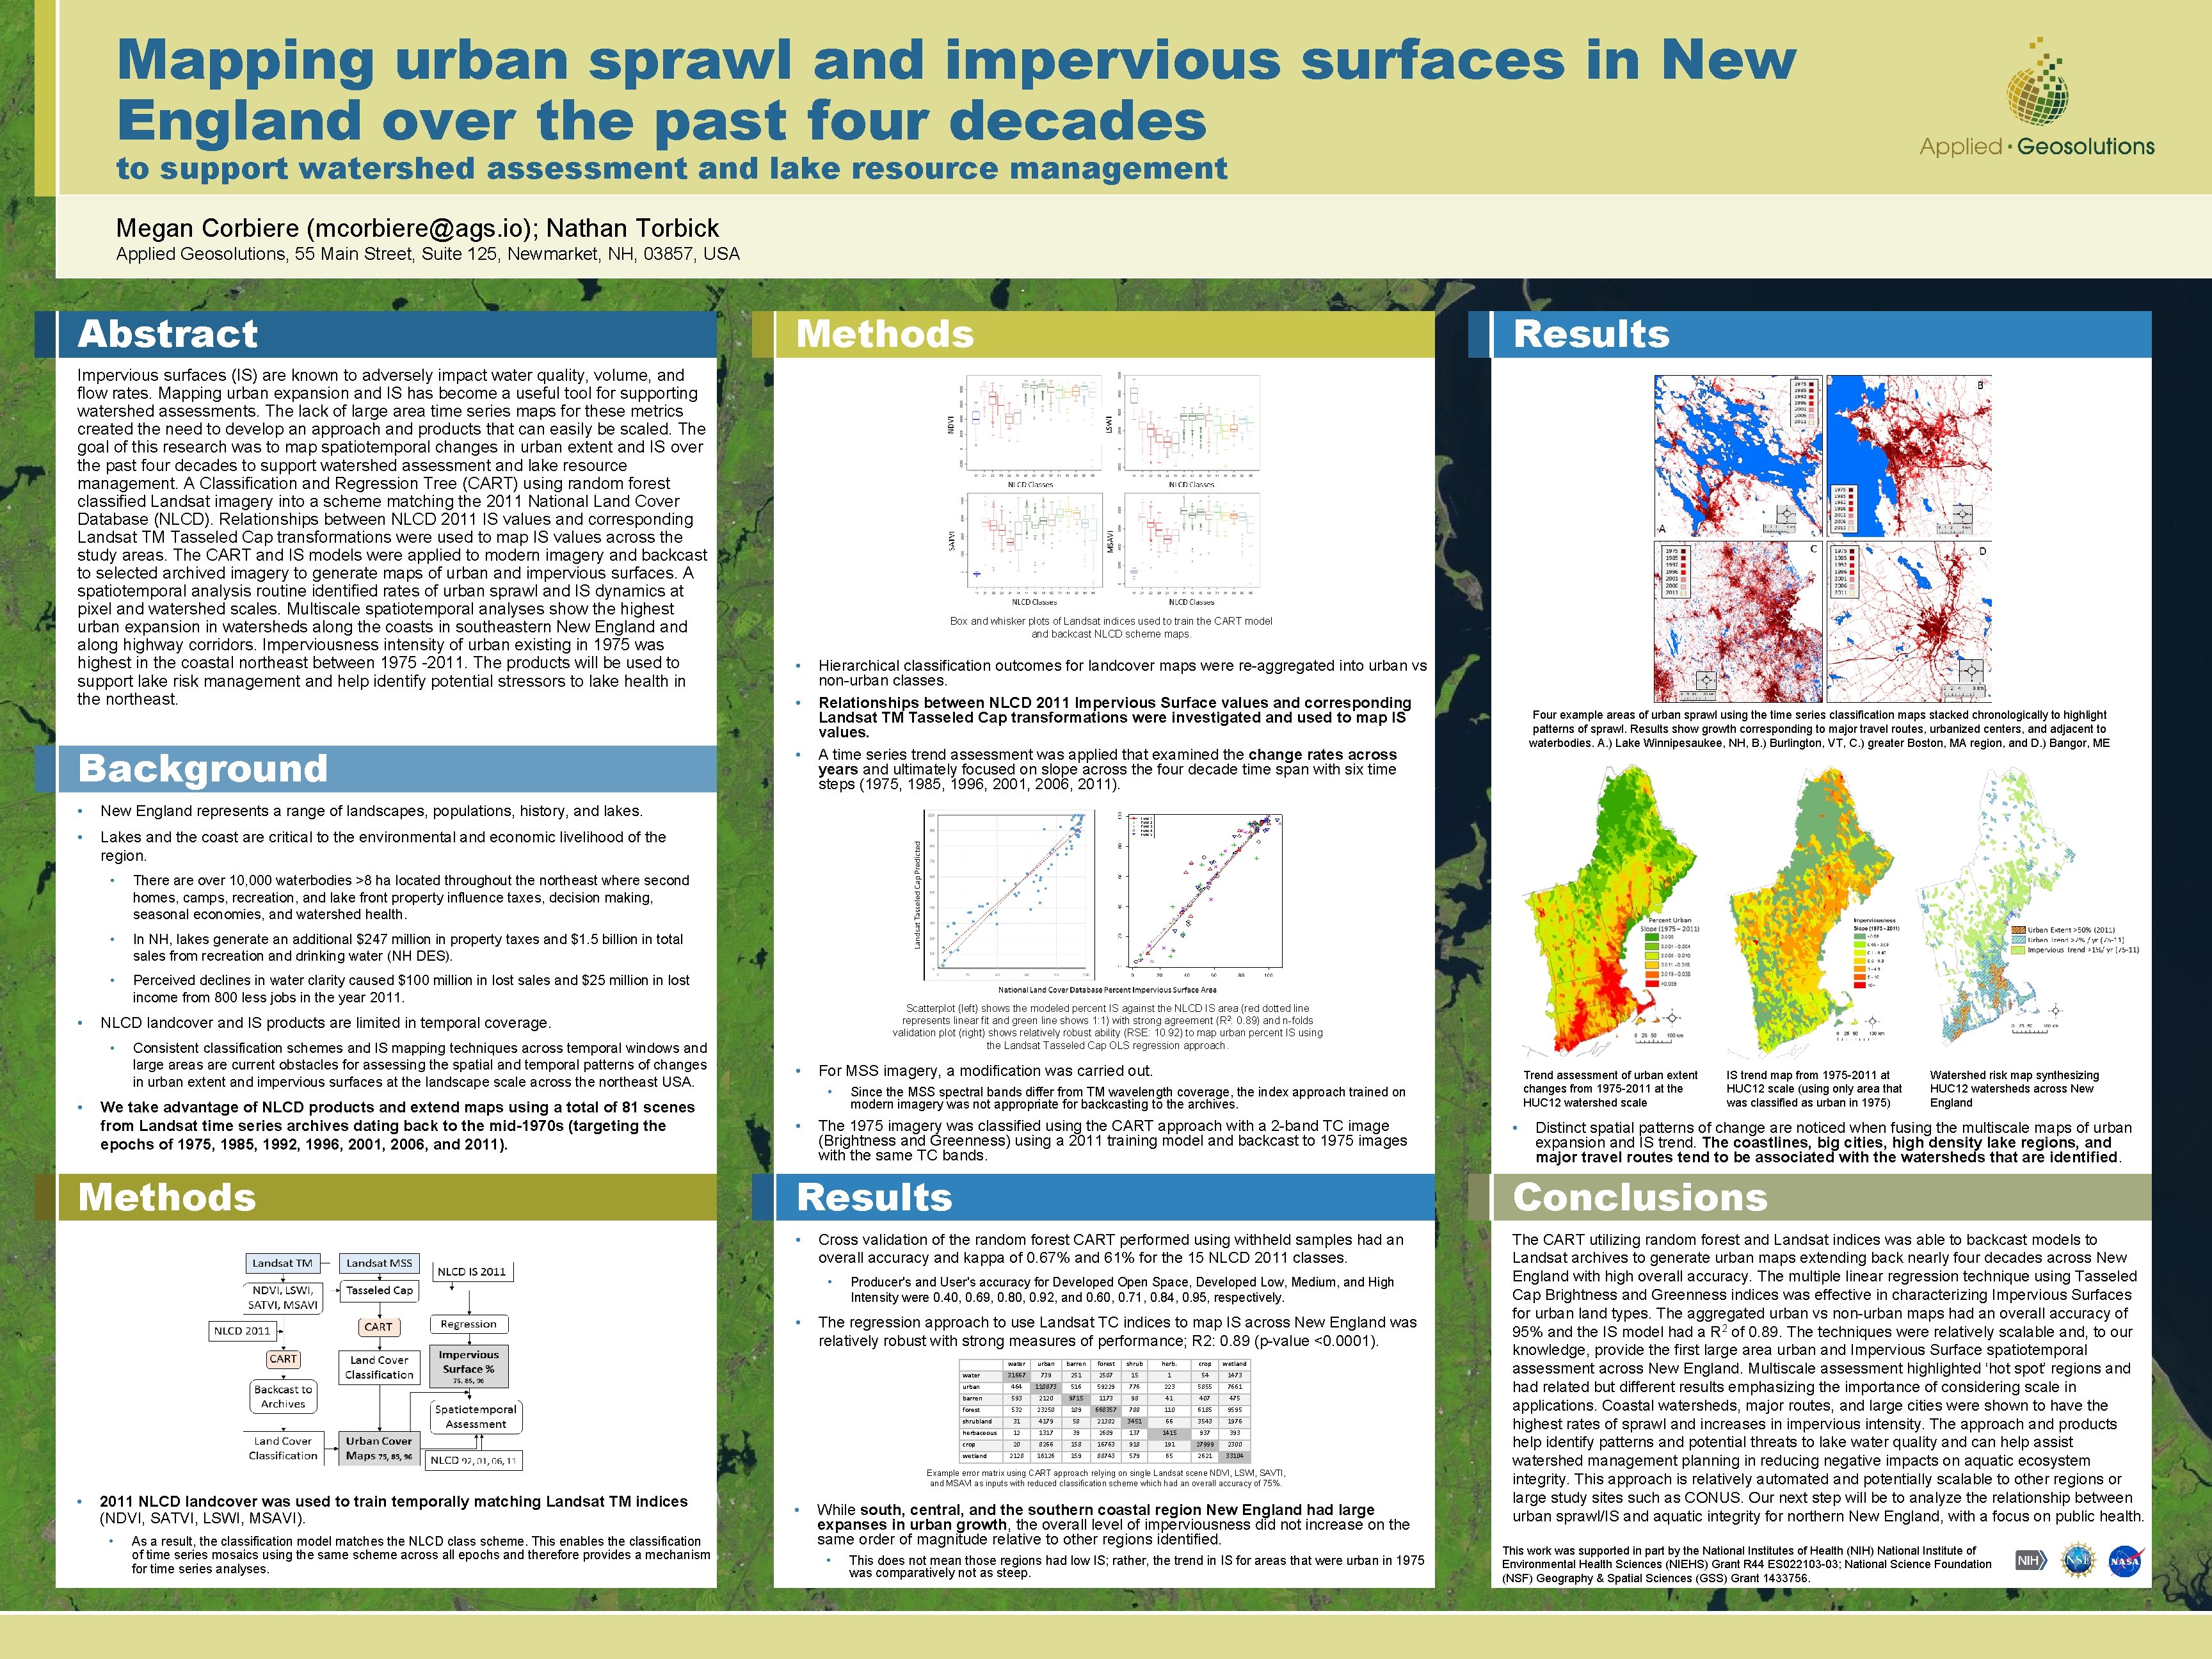 Mapping urban sprawl and impervious surfaces in New England over the past four decades